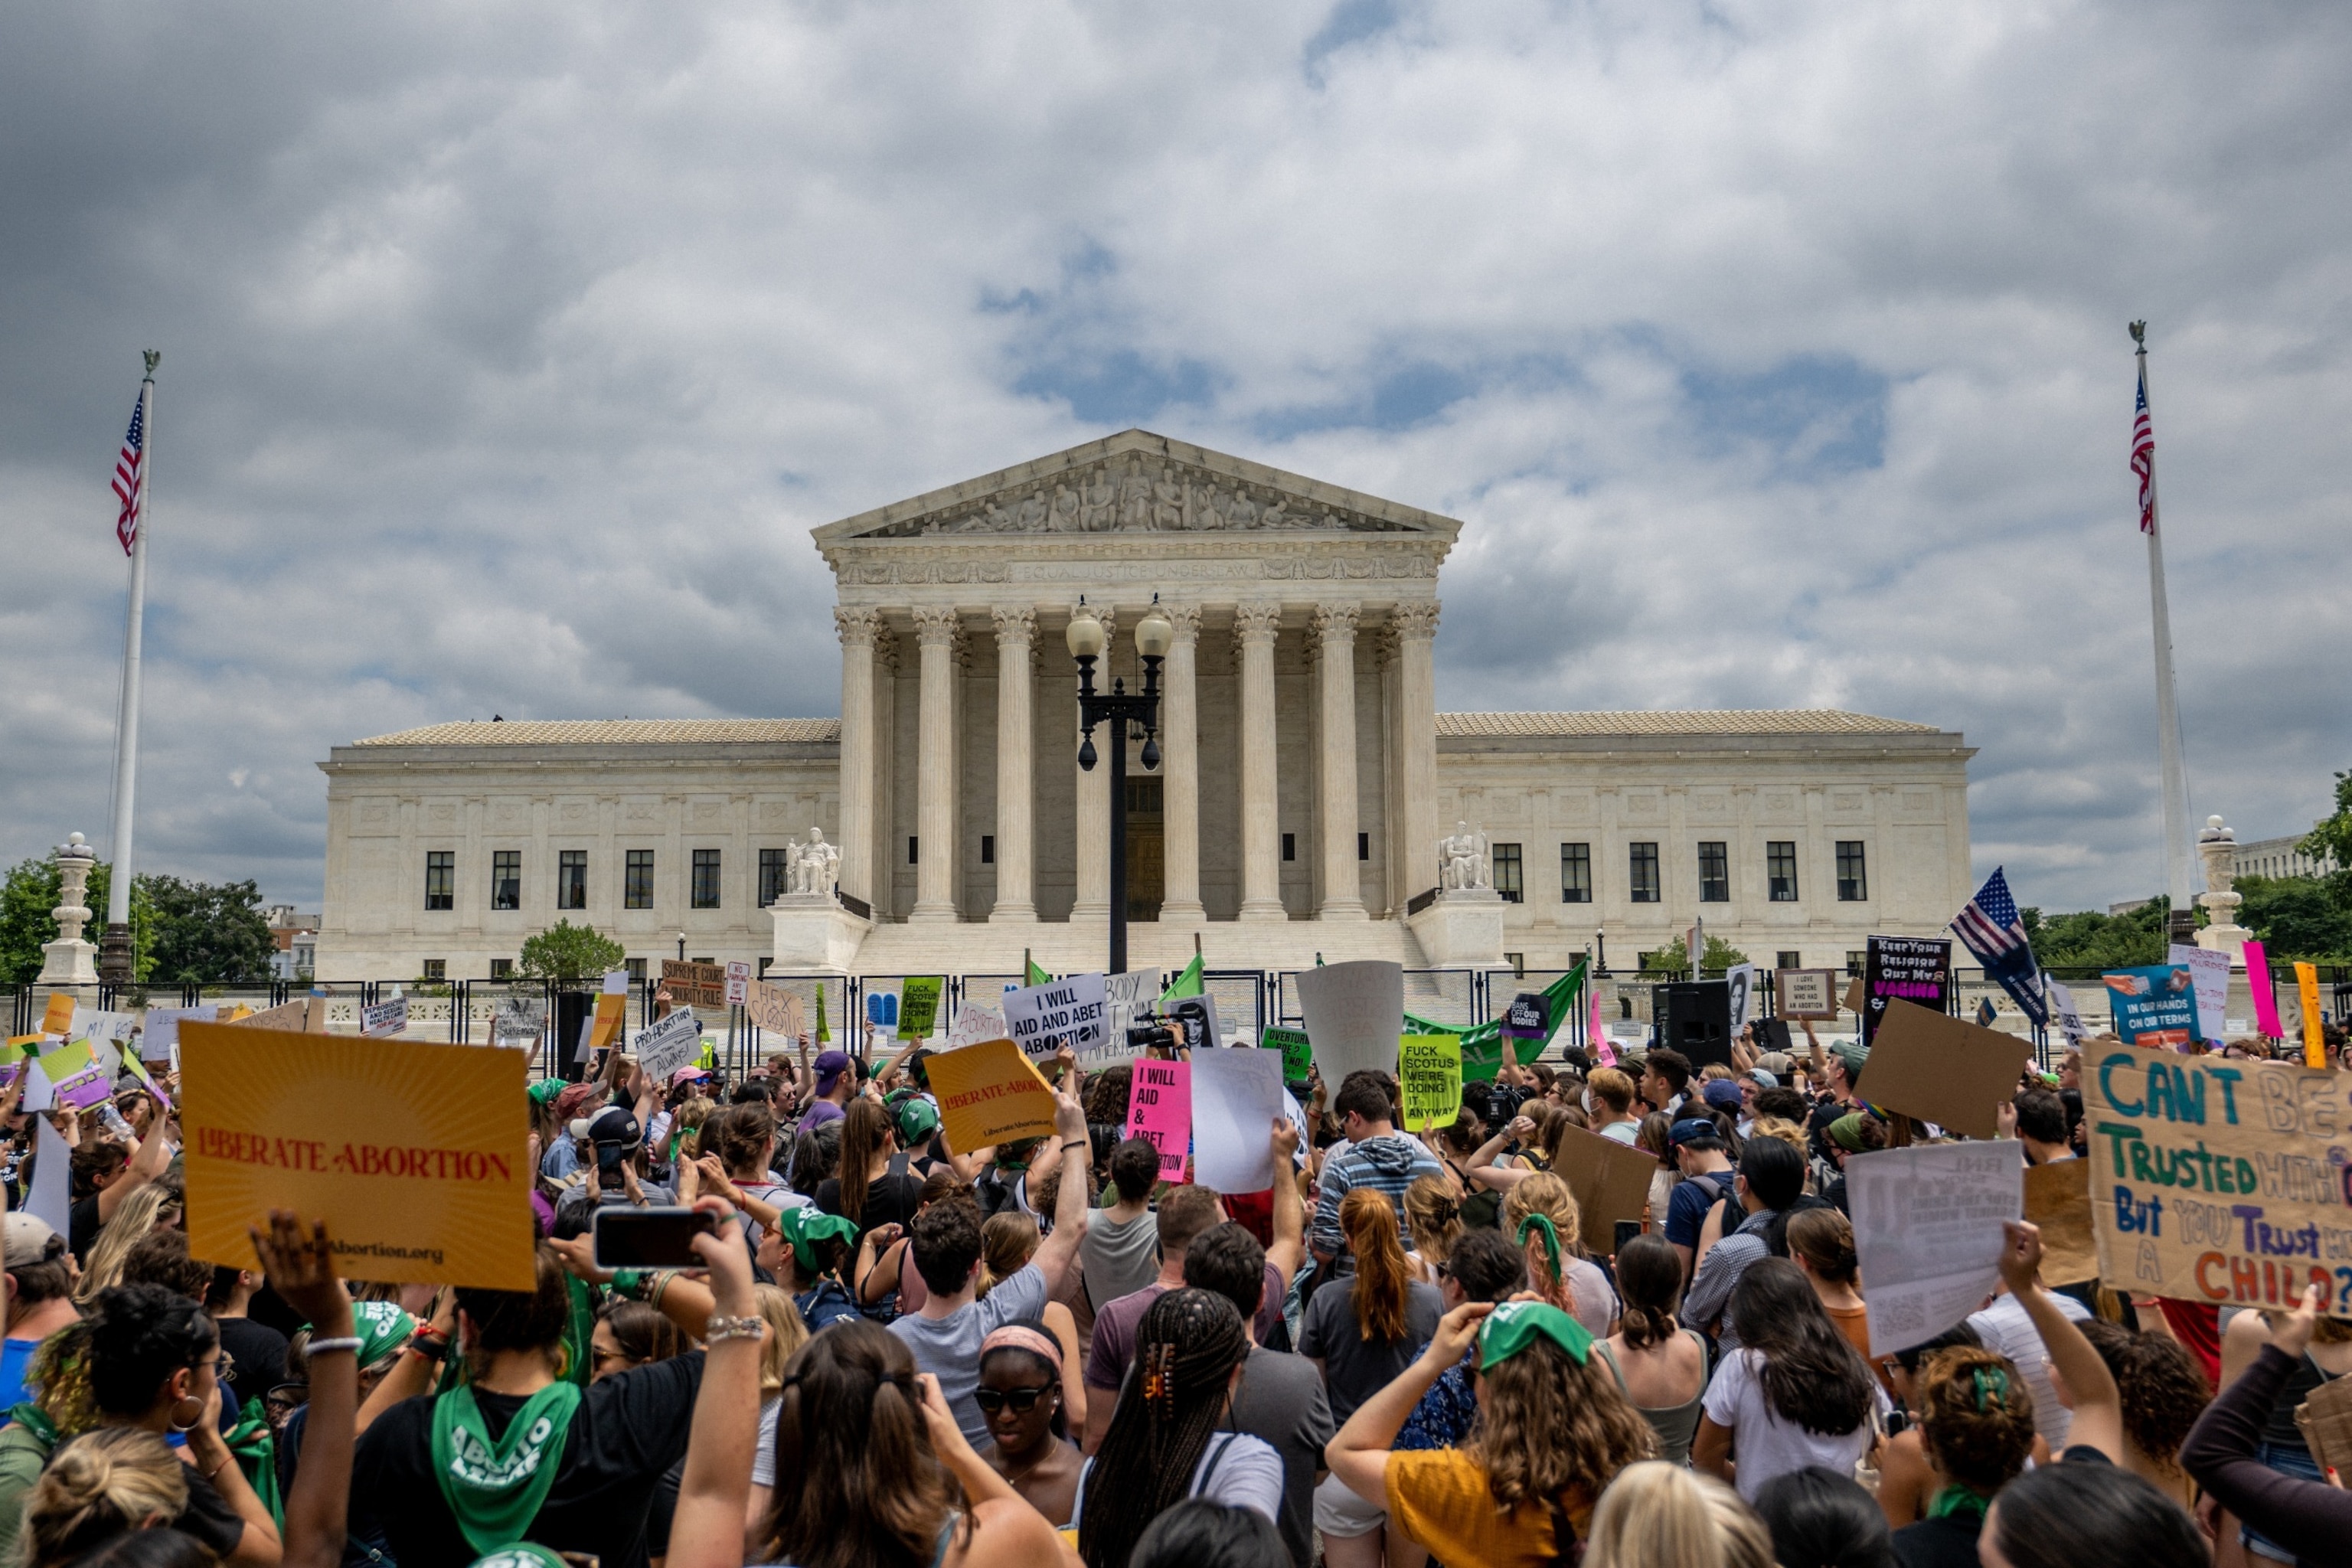 PHOTO: People protest in response to the Dobbs v. Jackson Women's Health Organization ruling in front of the U.S. Supreme Court in Washington, D.C., June 24, 2022.